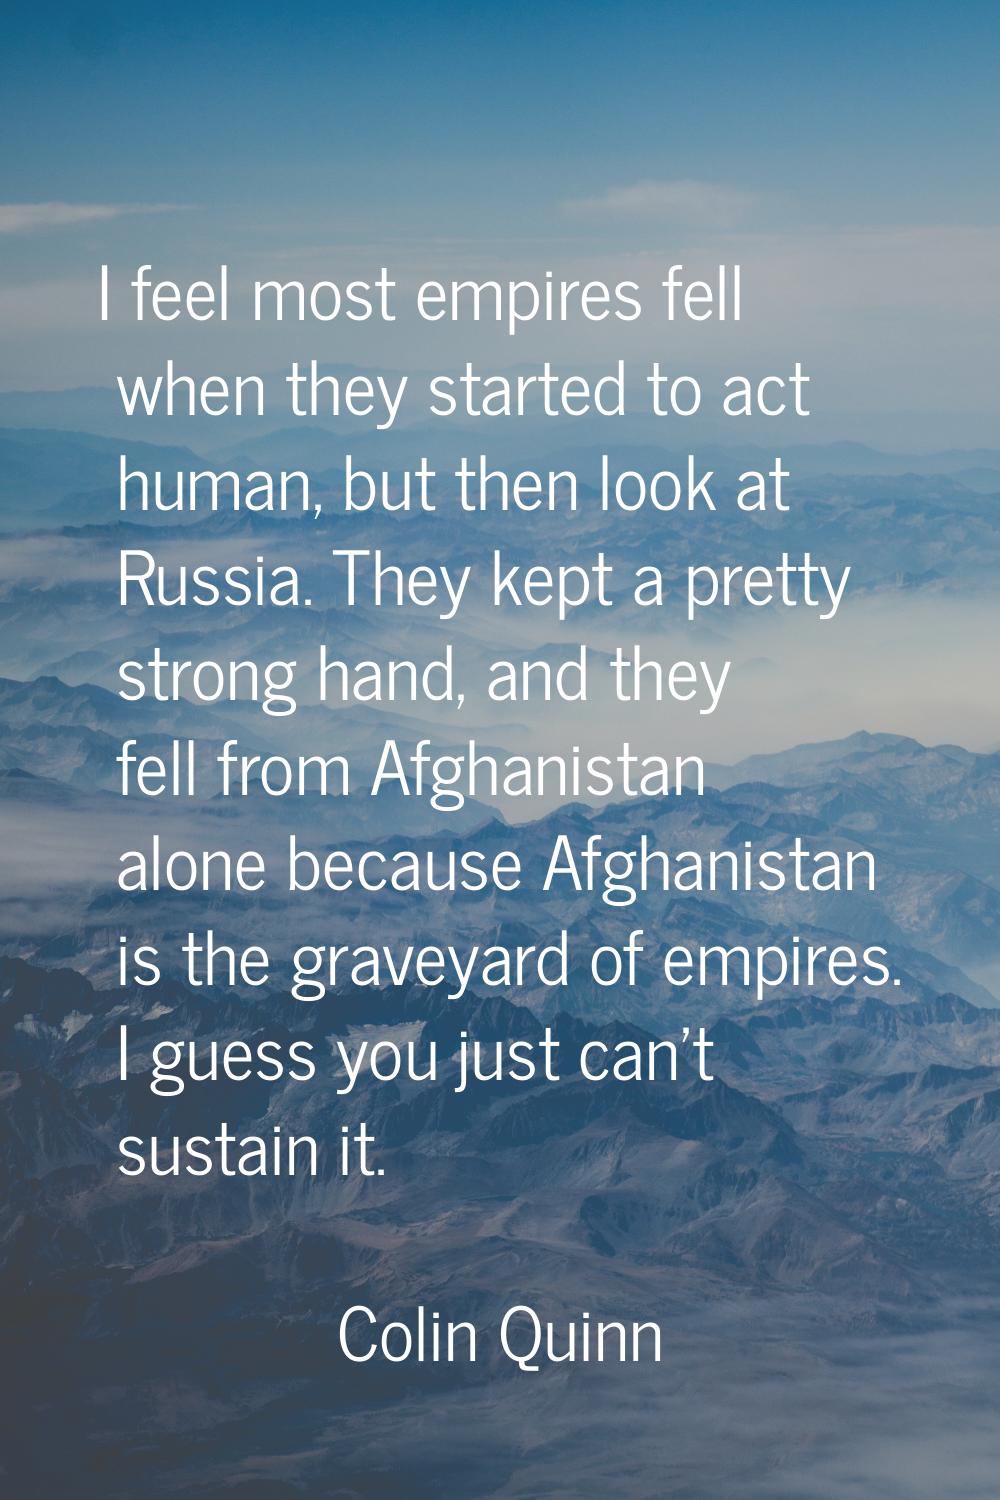 I feel most empires fell when they started to act human, but then look at Russia. They kept a prett